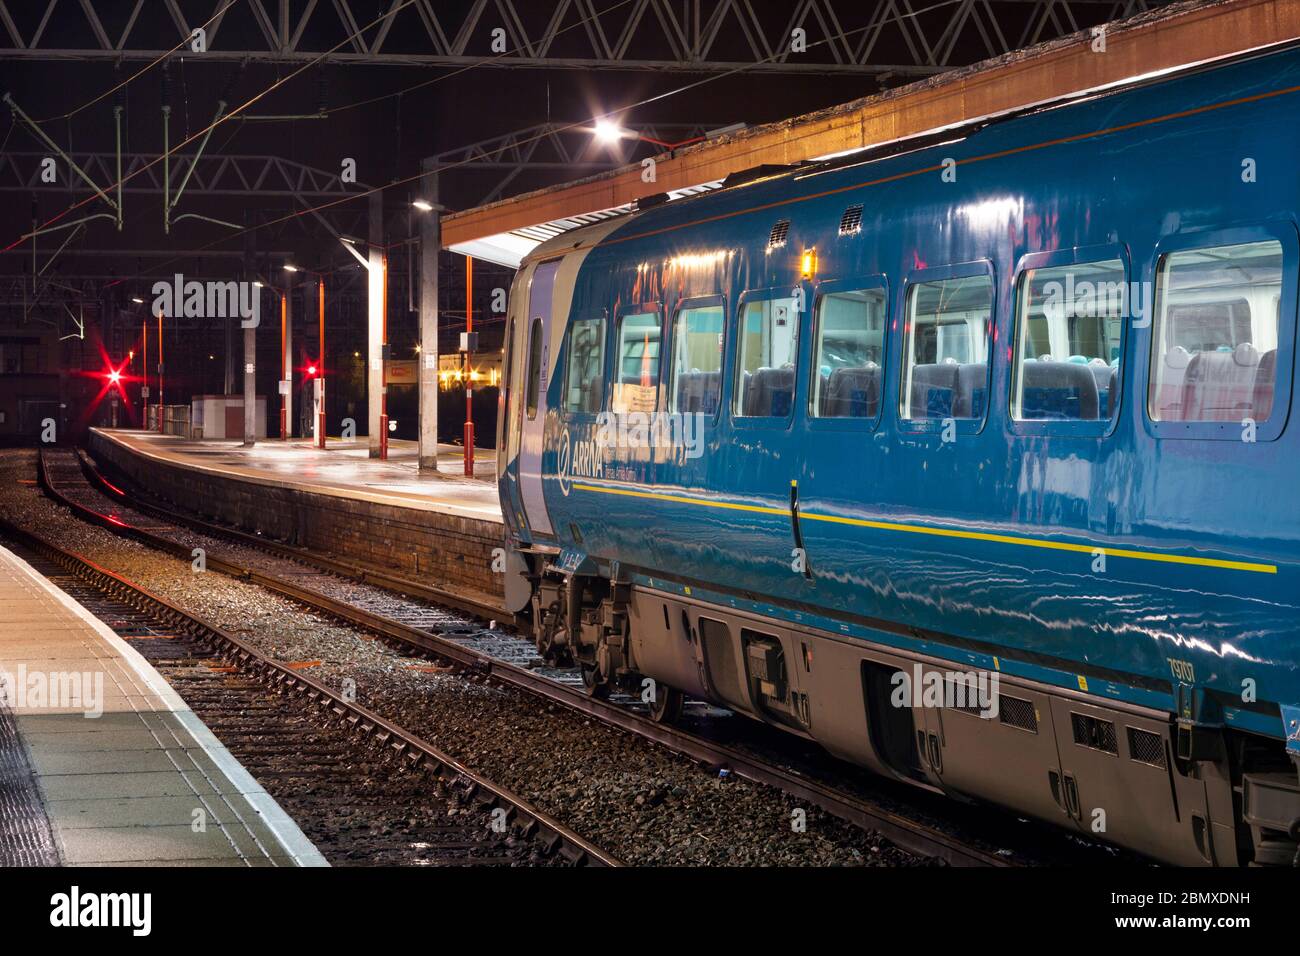 Arriva Trains Wales Alstom class 175 Coradia train 175007 waiting at Crewe railway station with a late night train with a red danger signal Stock Photo